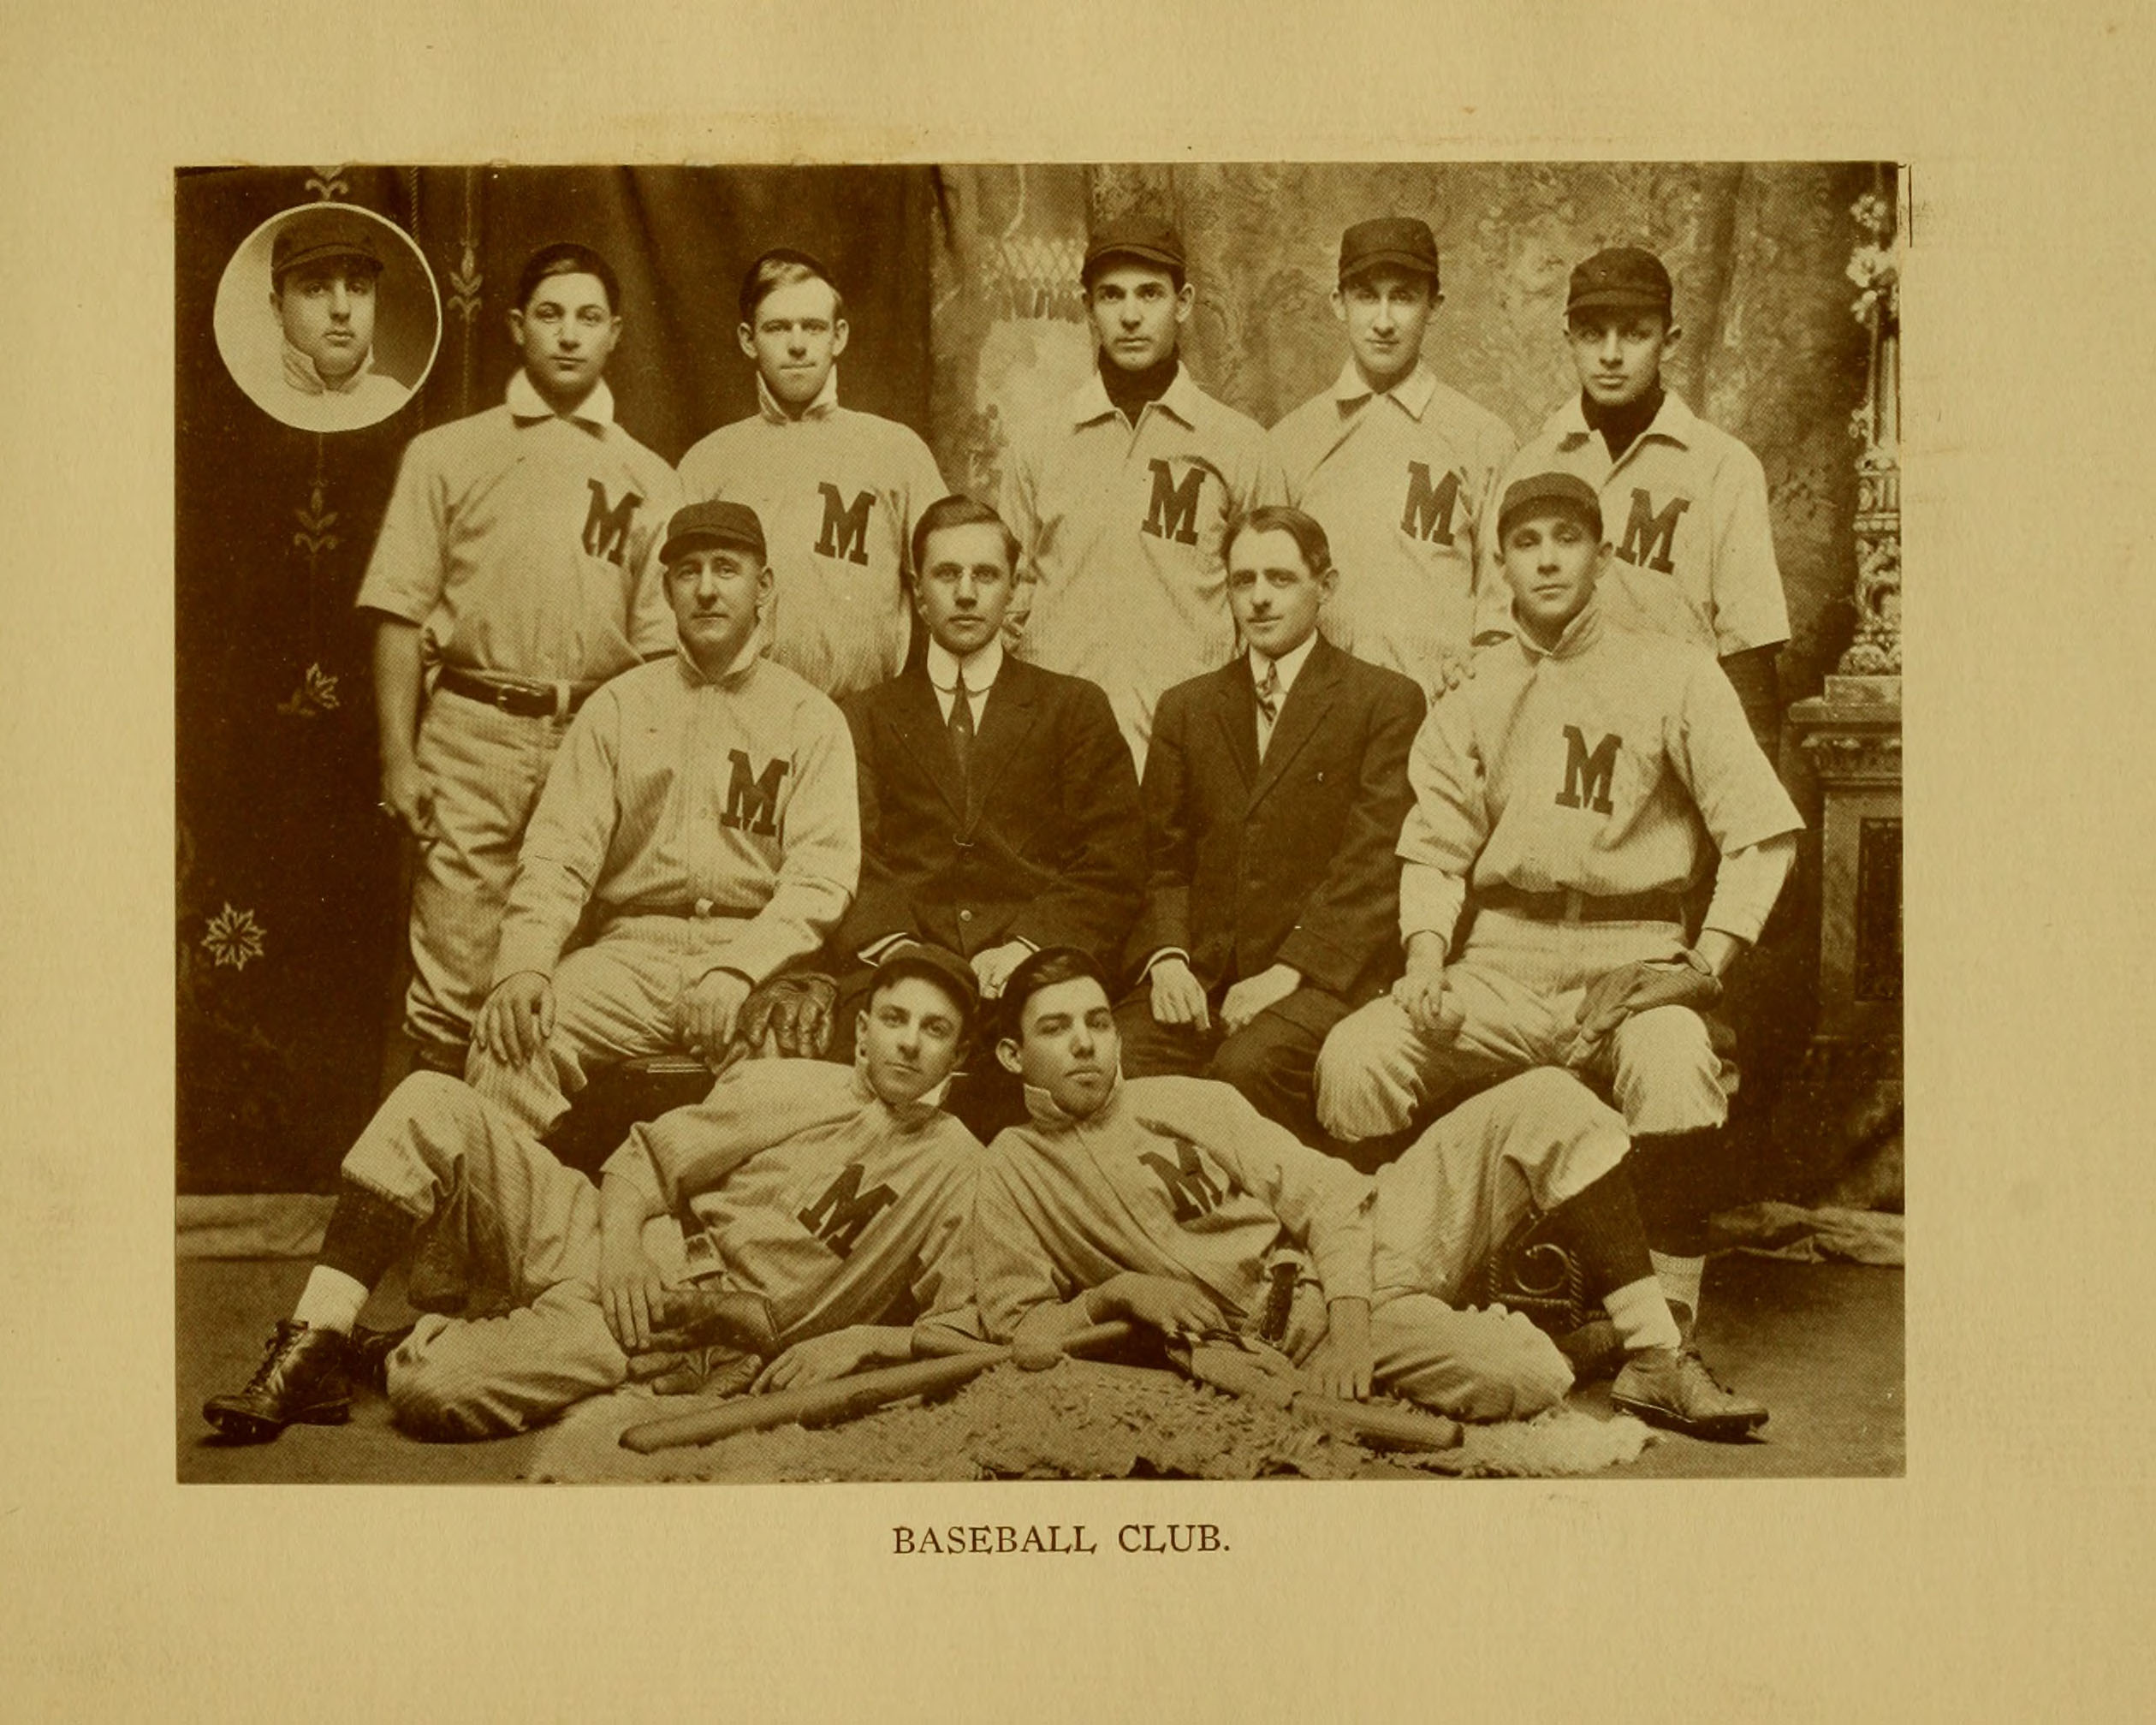 Black and white photograph of a group of men in baseball gear.